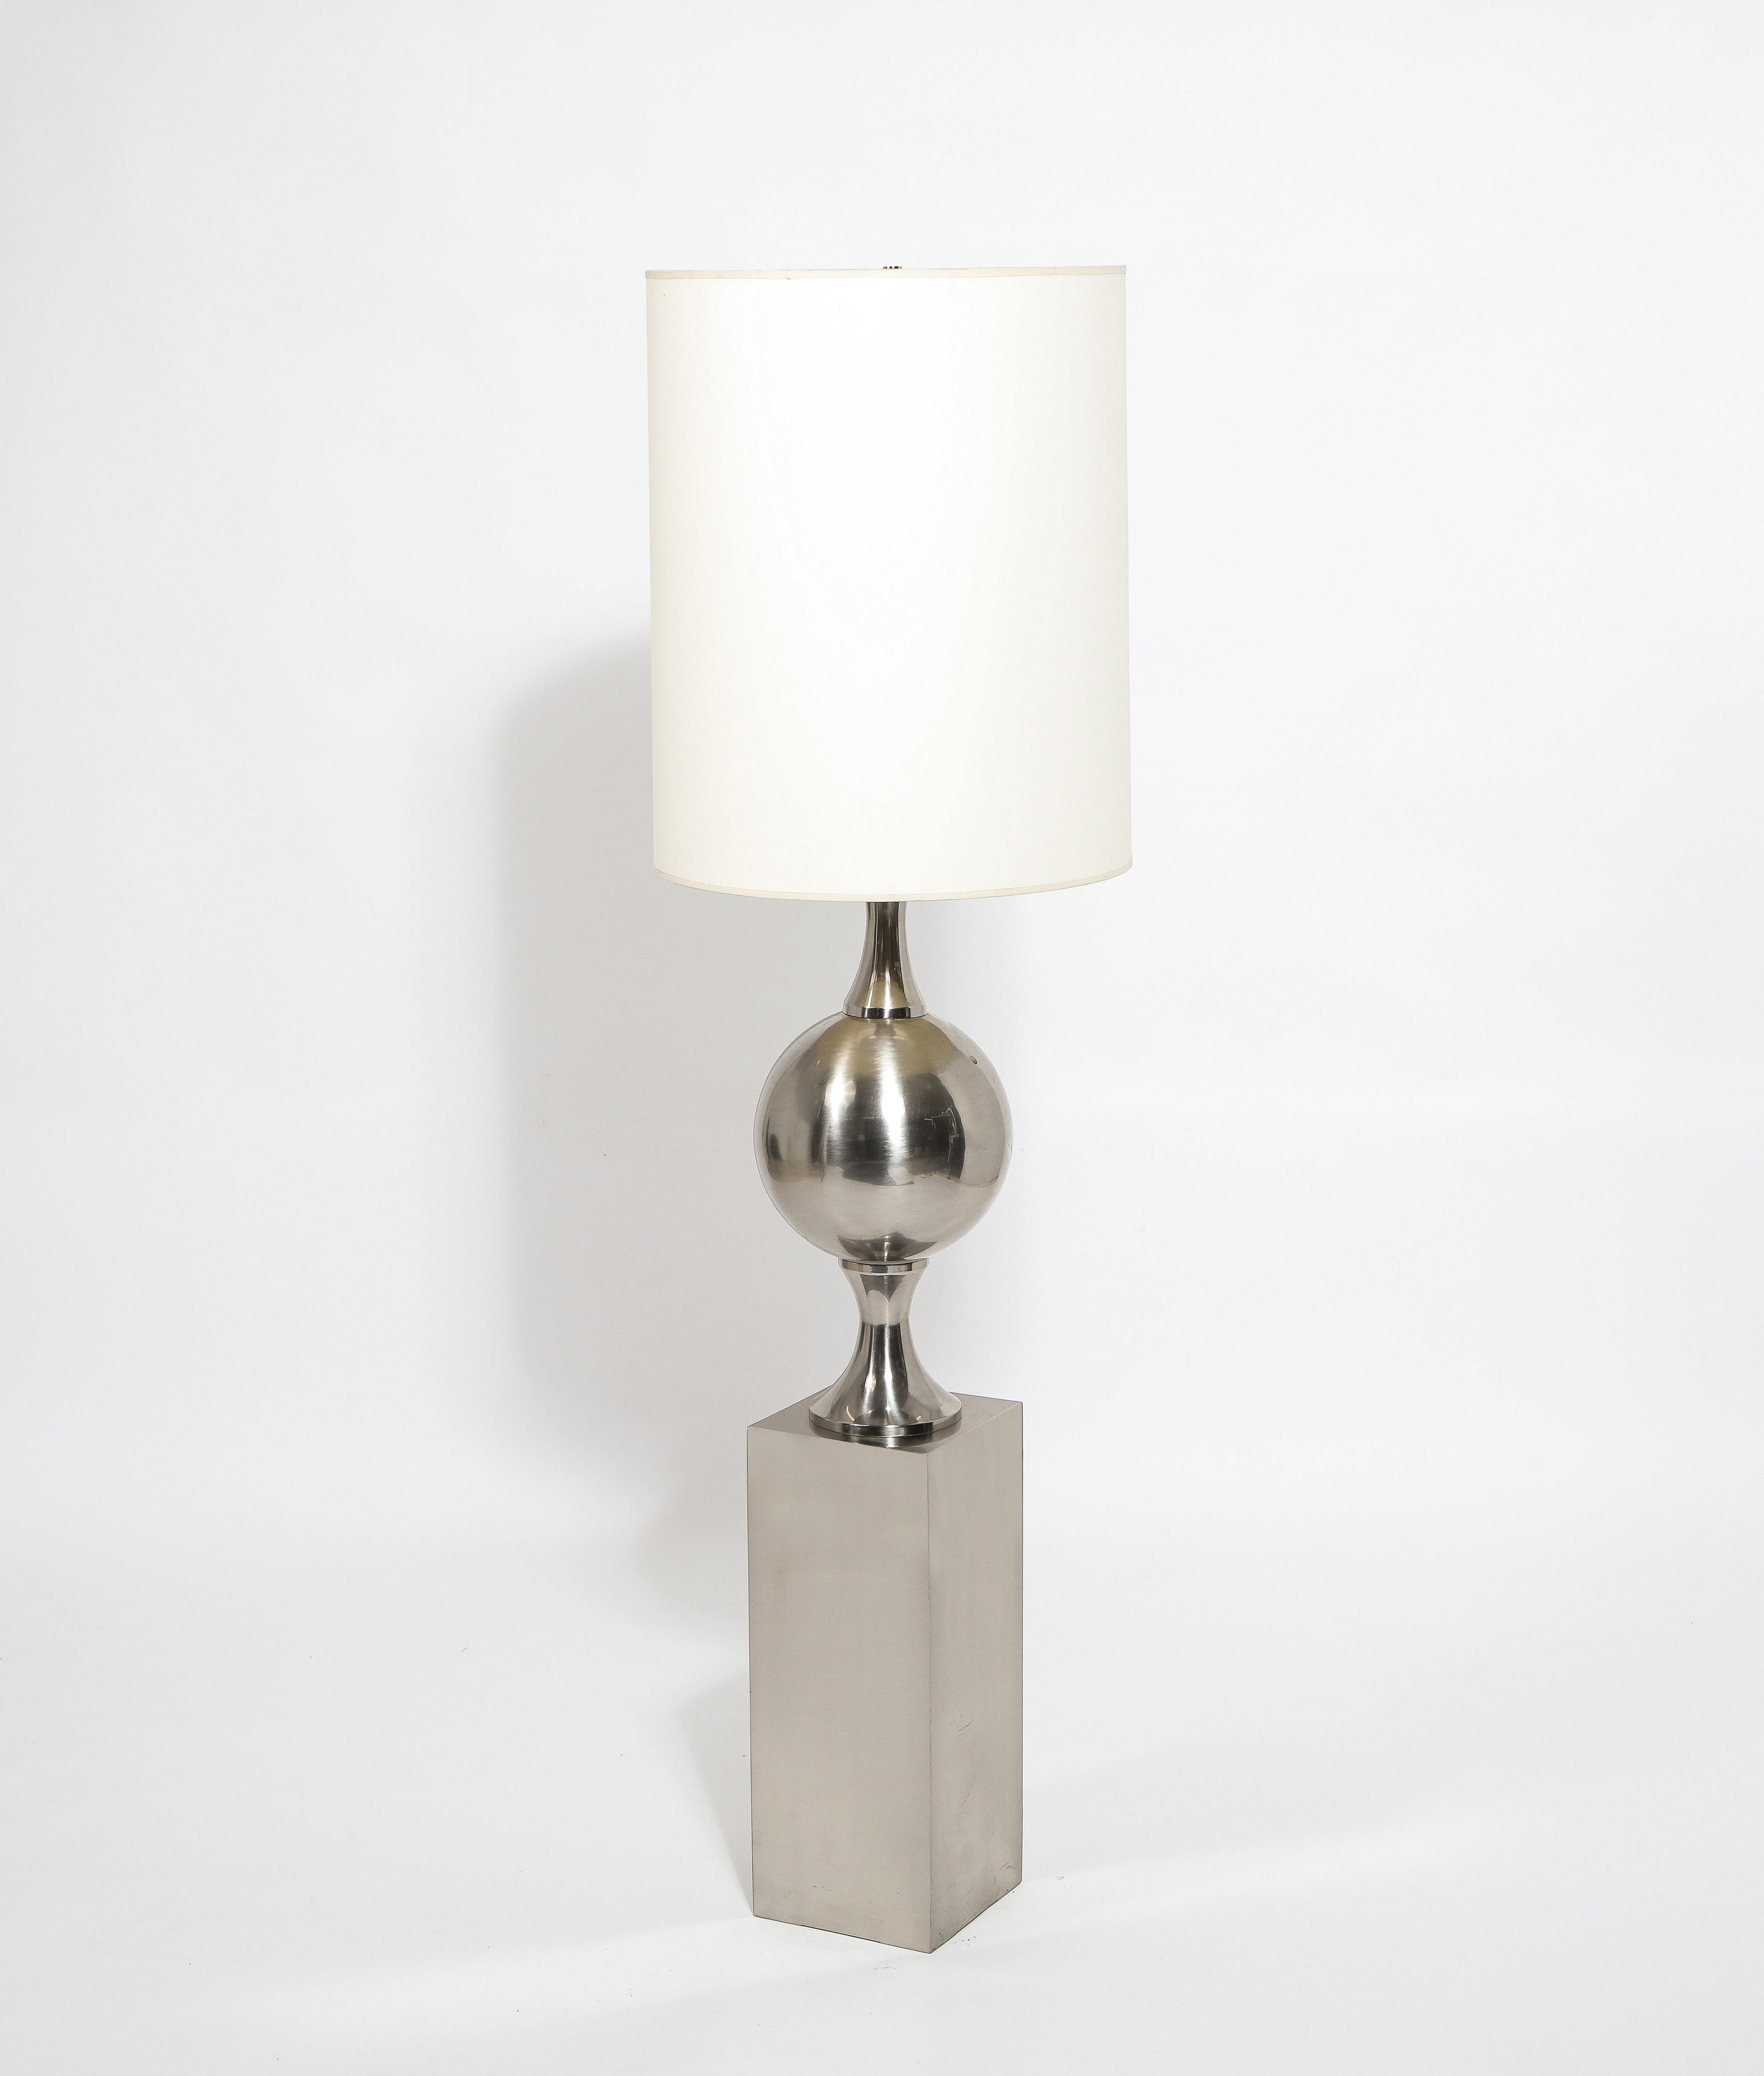 French Barbier Floor Lamp in Nickel Plated Brass, France 1970's For Sale